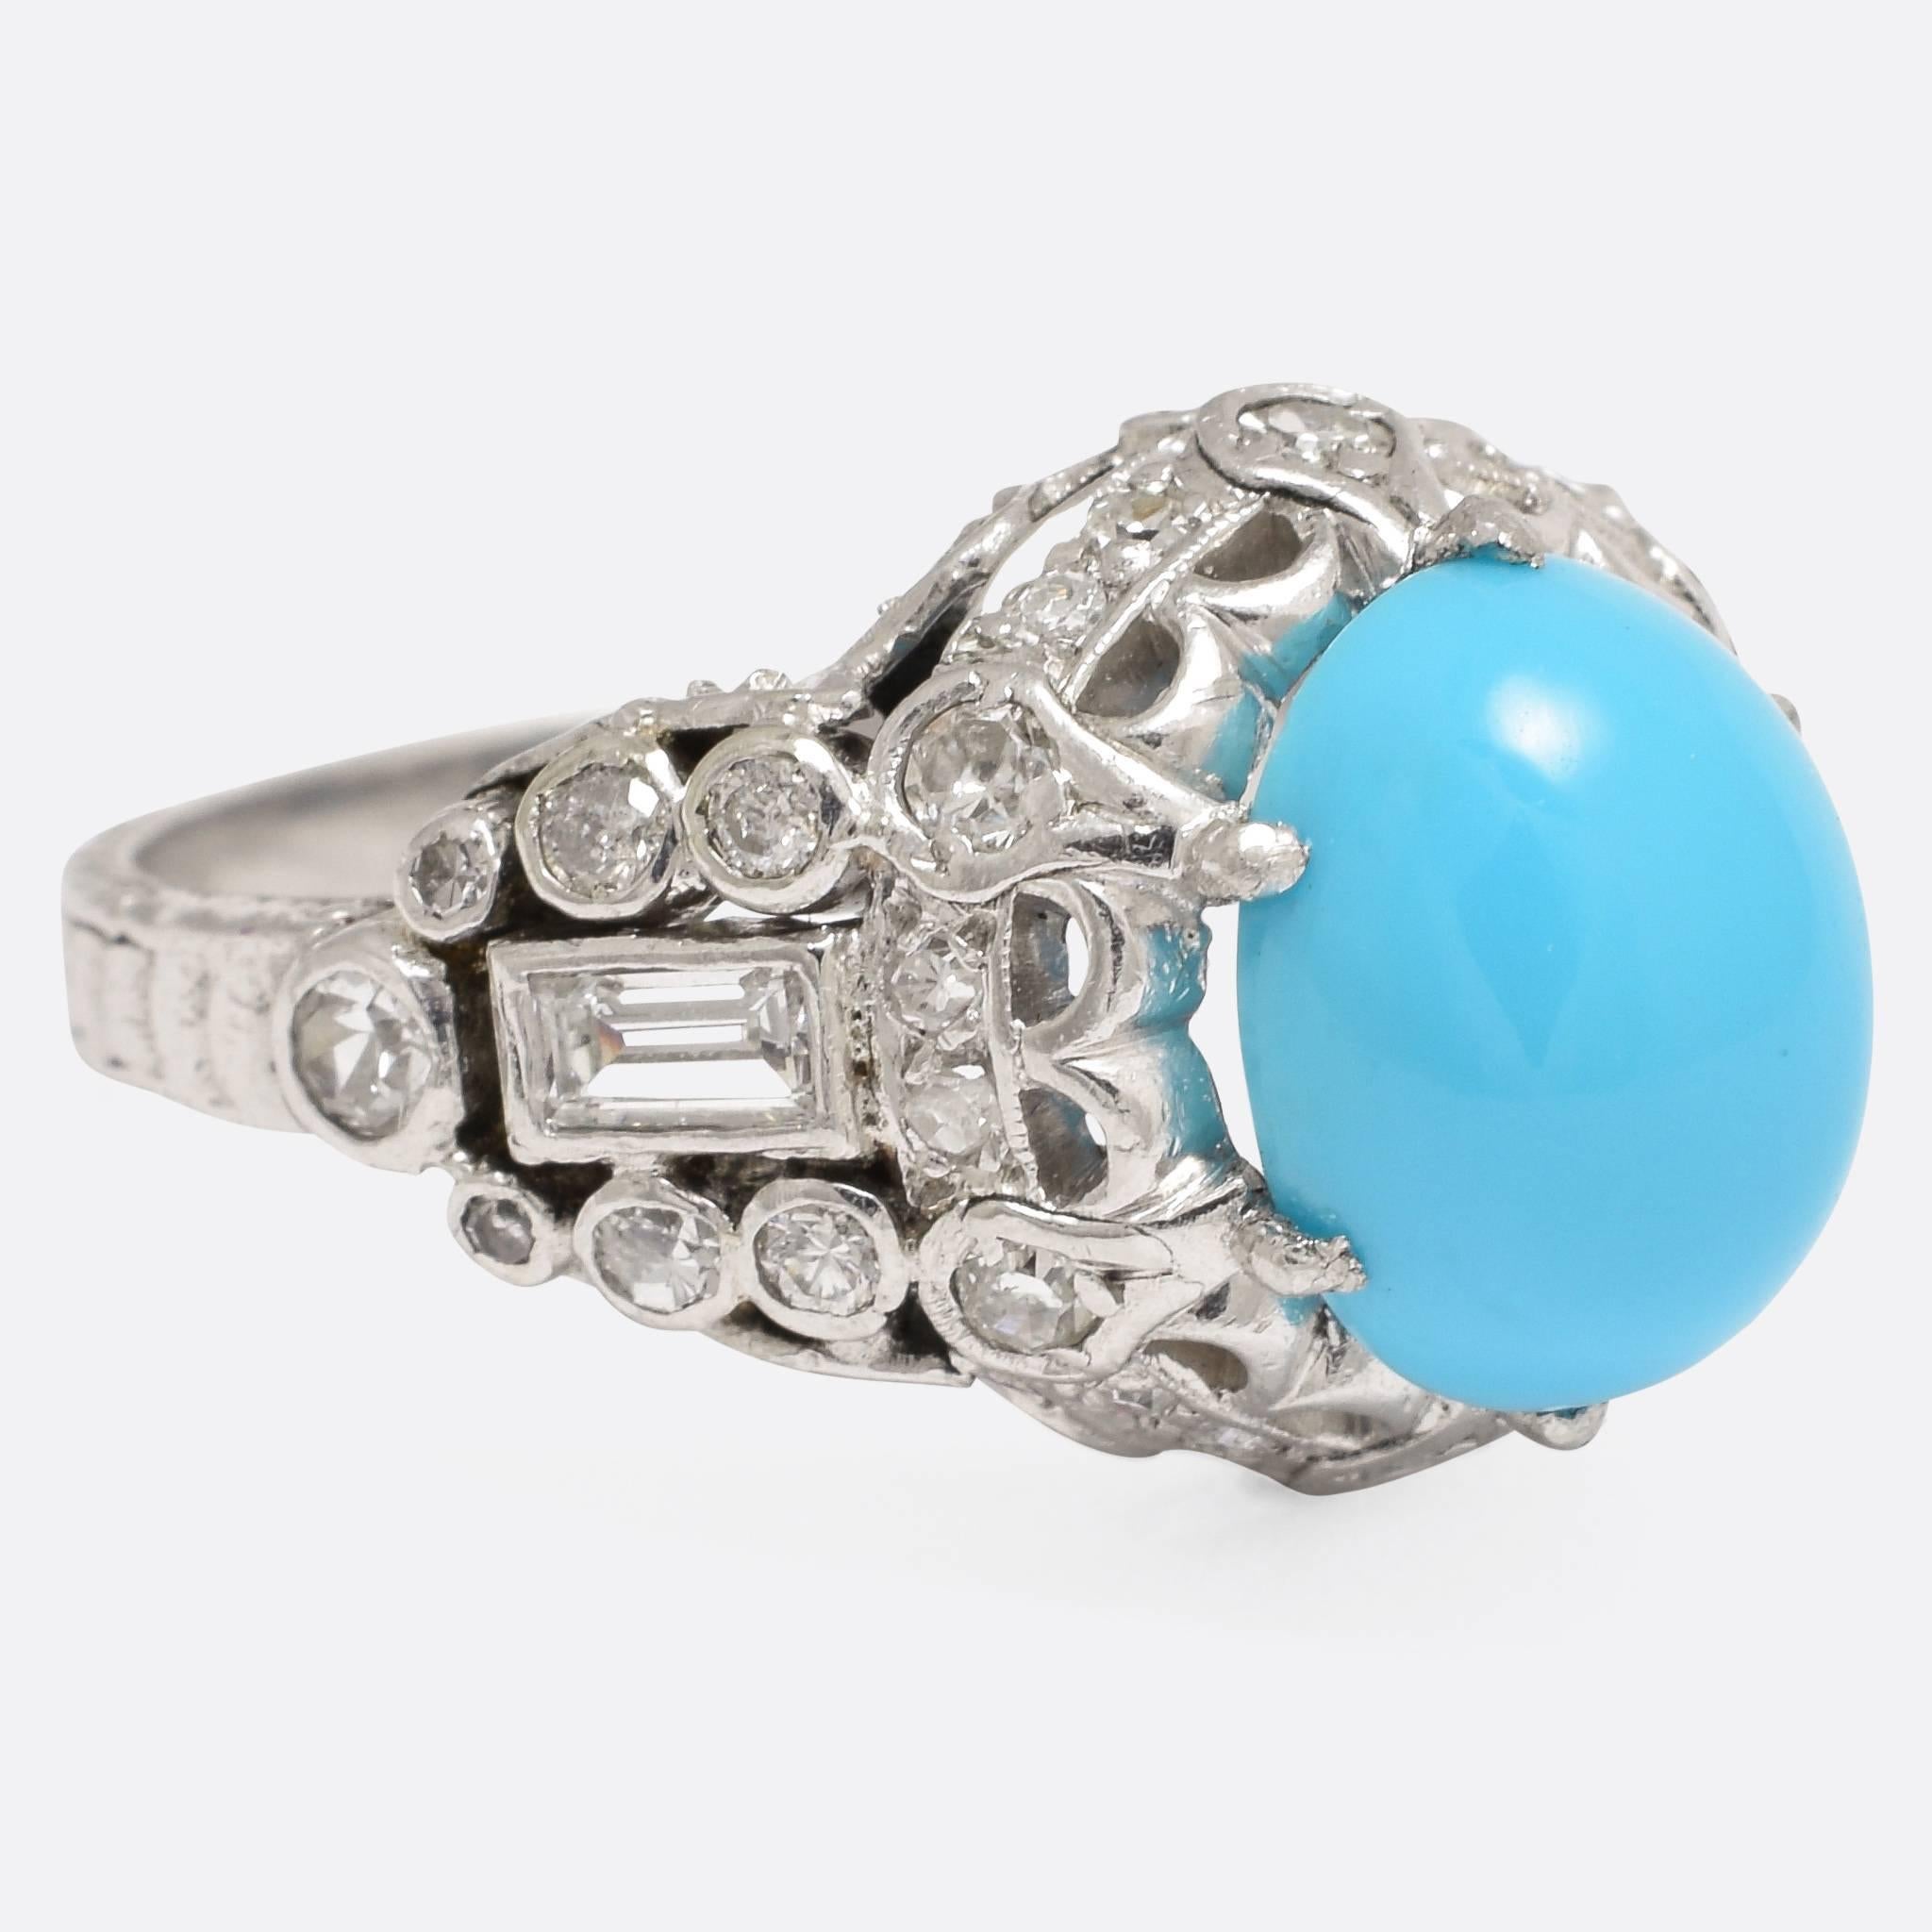 A magnificent, highly ornate 1930s cocktail ring - French and in the Art Deco style. The principal stone is a vibrant Persian turquoise, set with a combination of baguette and eight-cut diamonds. The head features gorgeous openwork, with millegrain